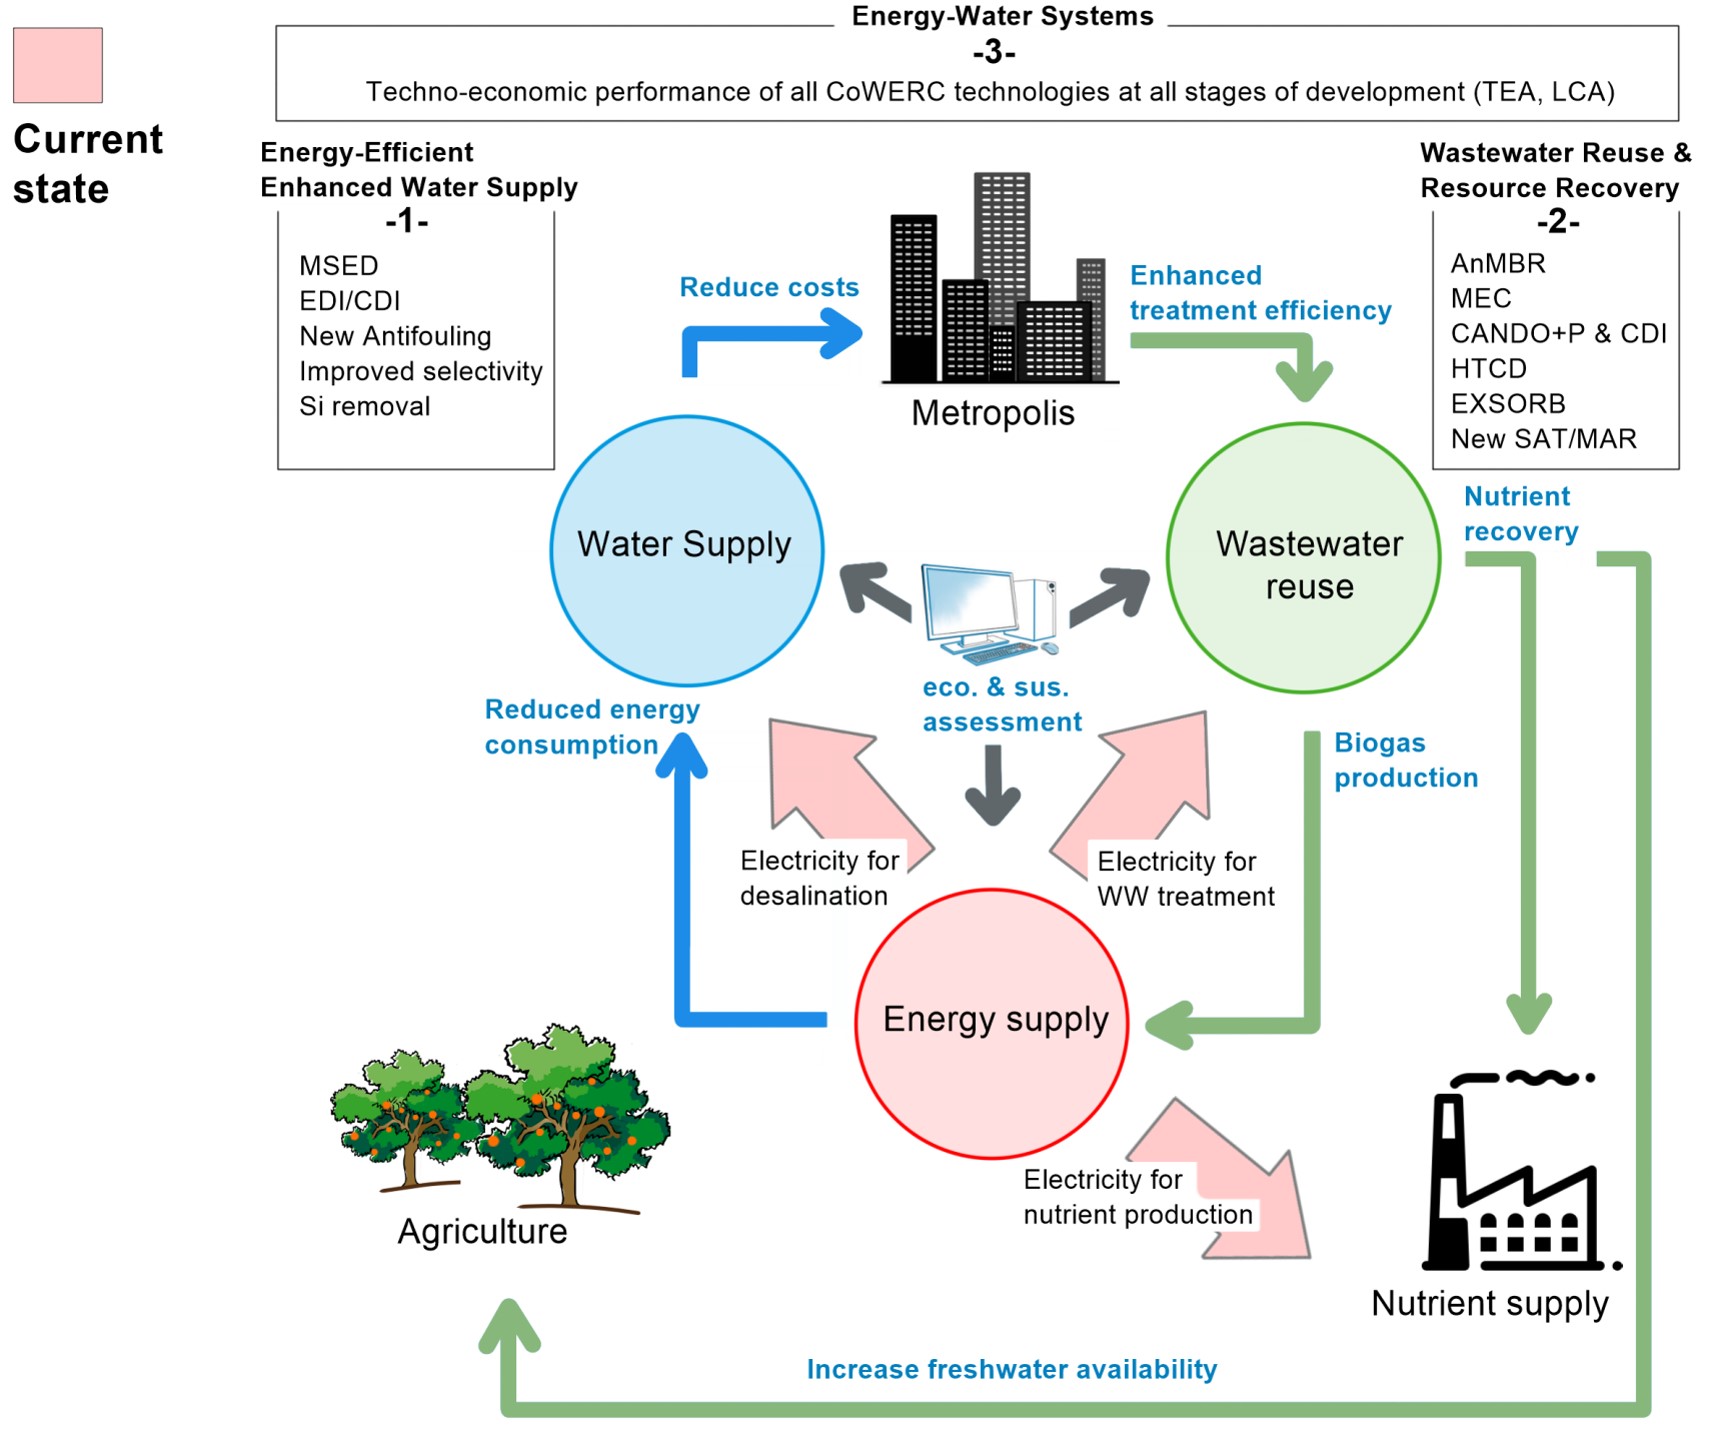 Energy-Water Systems.jpg